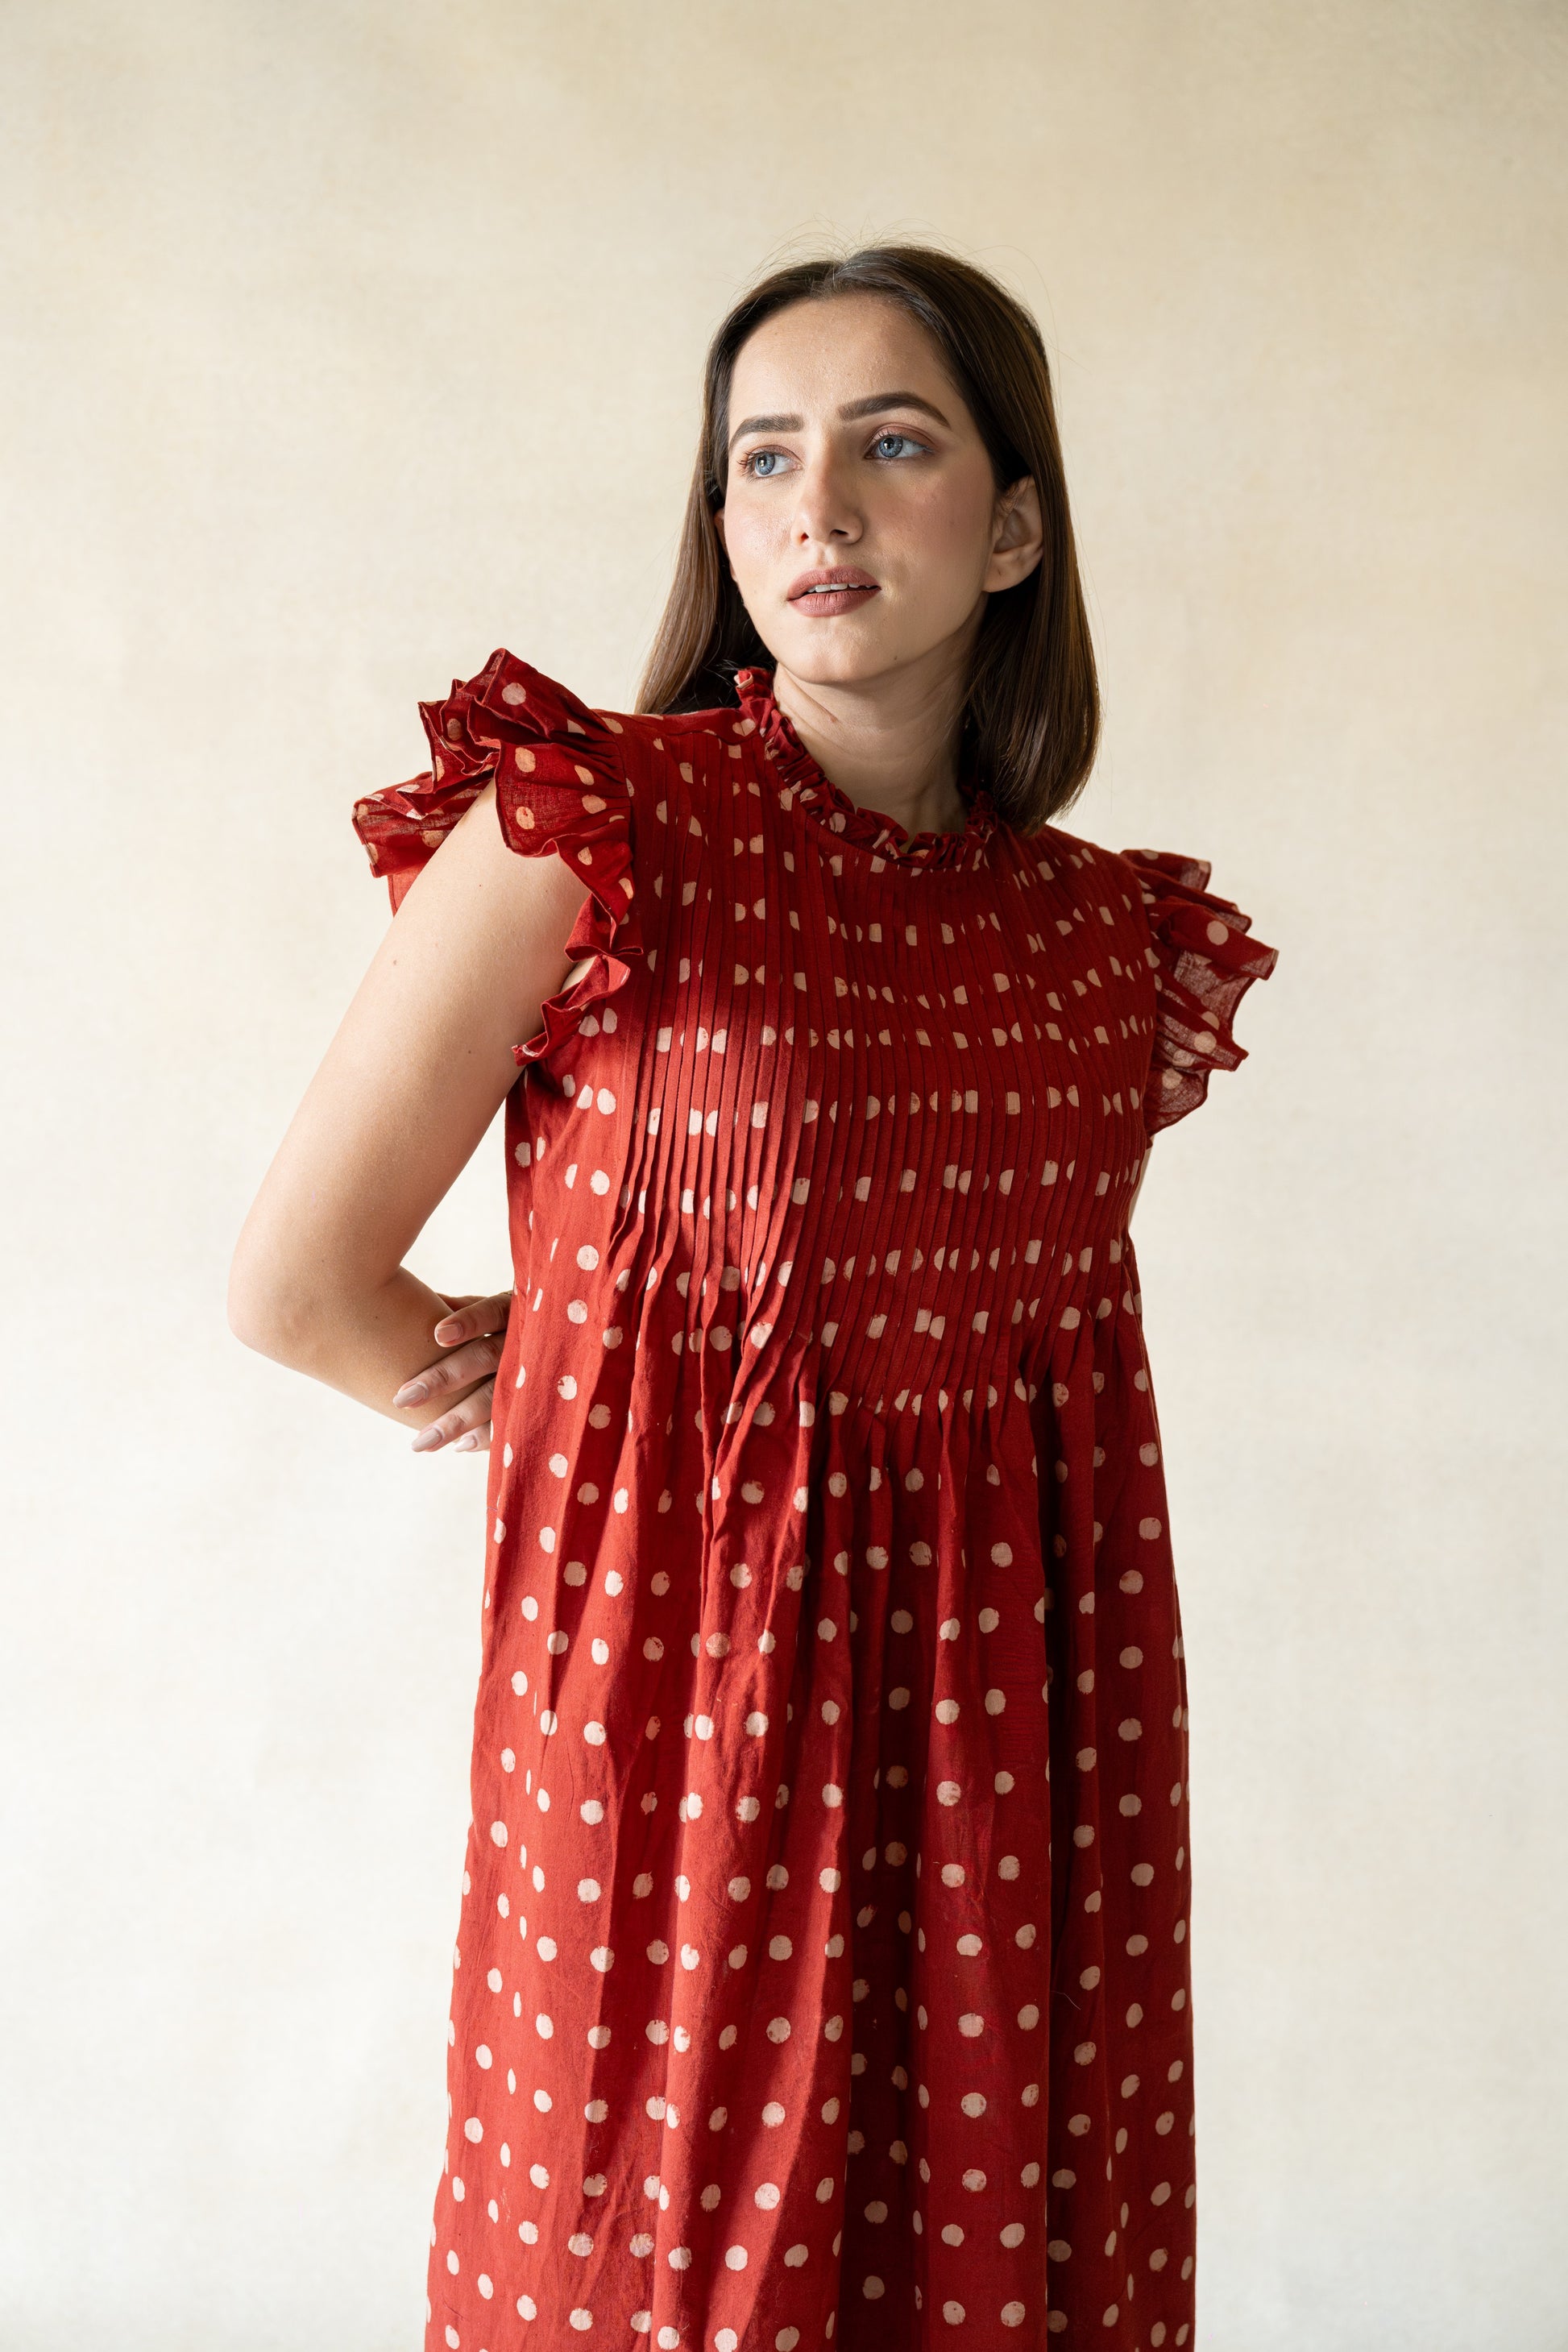 Get ready to turn heads with this funky frock! Featuring playful polka dots, ruffled sleeves, charming pin tucks, a frilly neckline, and handy pockets, this dress is both chic and comfy. Whether you're dressing to impress or just feeling fancy, the Starry Madder Daydream Dress is the perfect choice for any occasion.